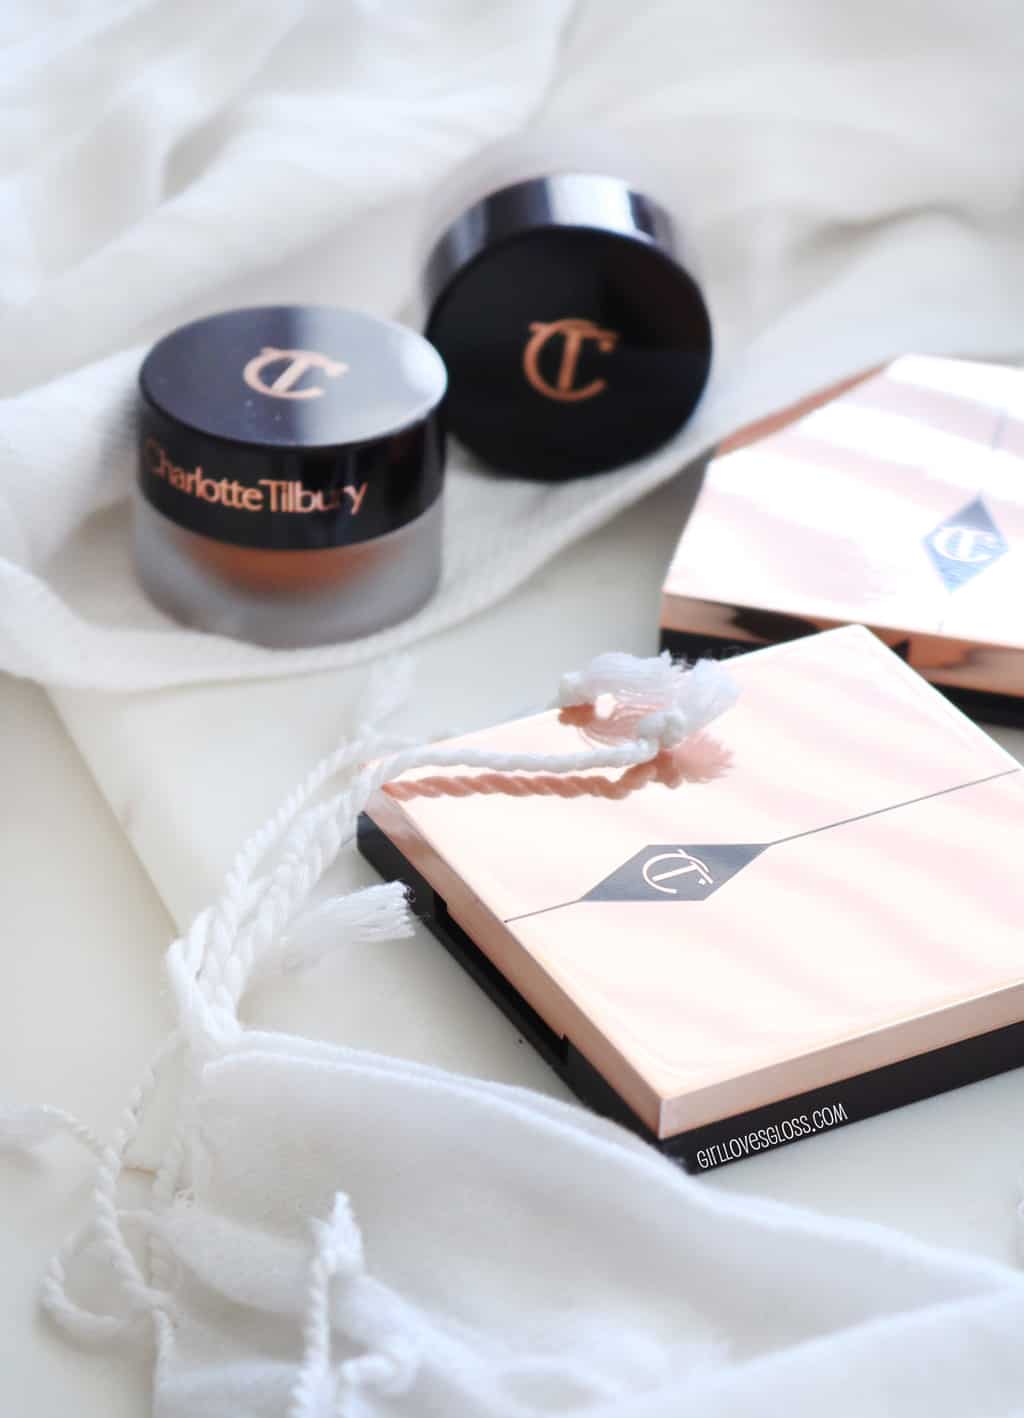 Charlotte Tilbury Pretty Youth Blush Filter and Eyes to Mesmerise